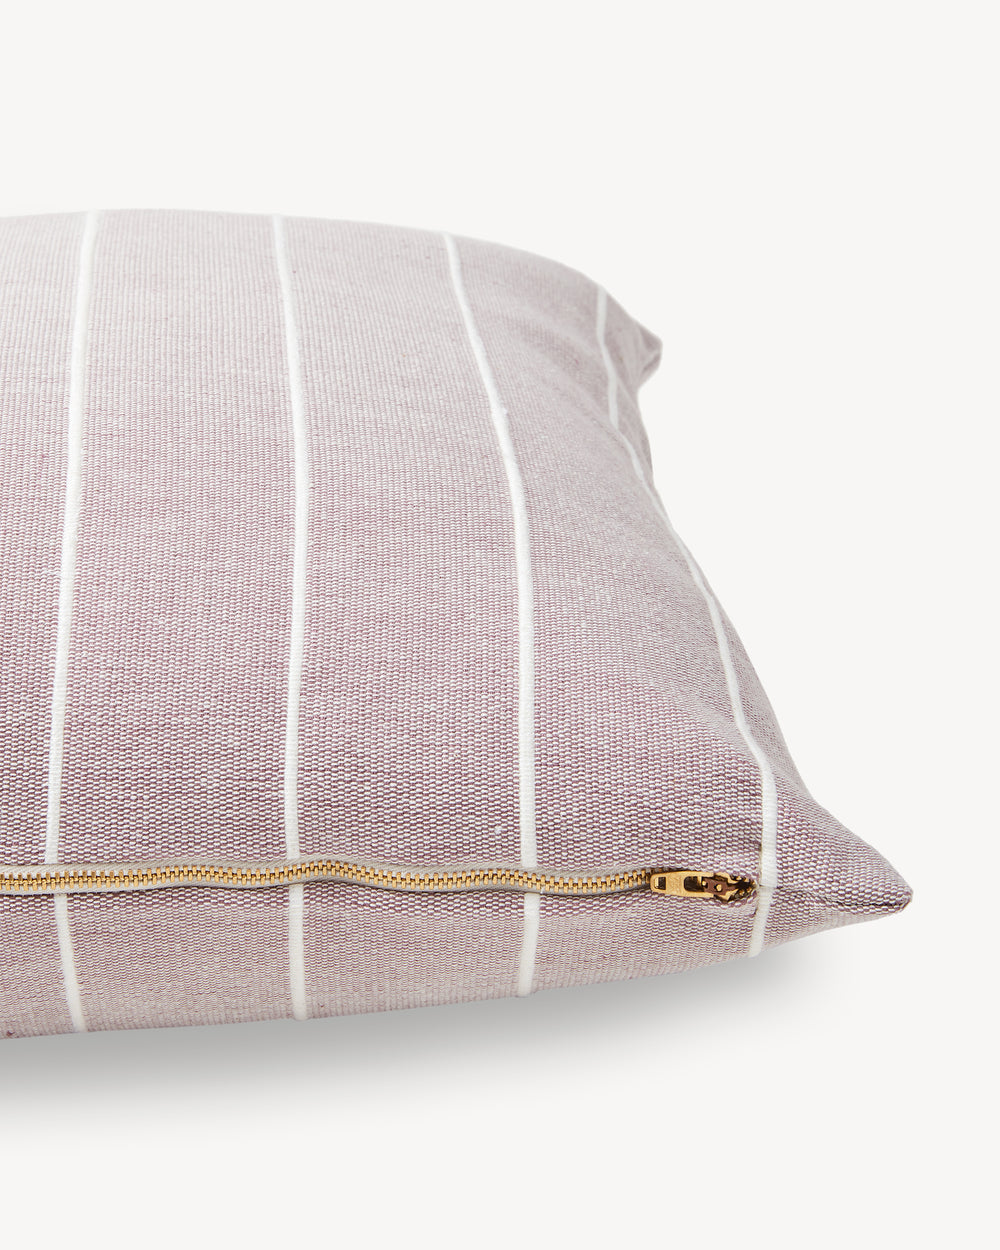 Recycled Stripe Pillow - Lilac